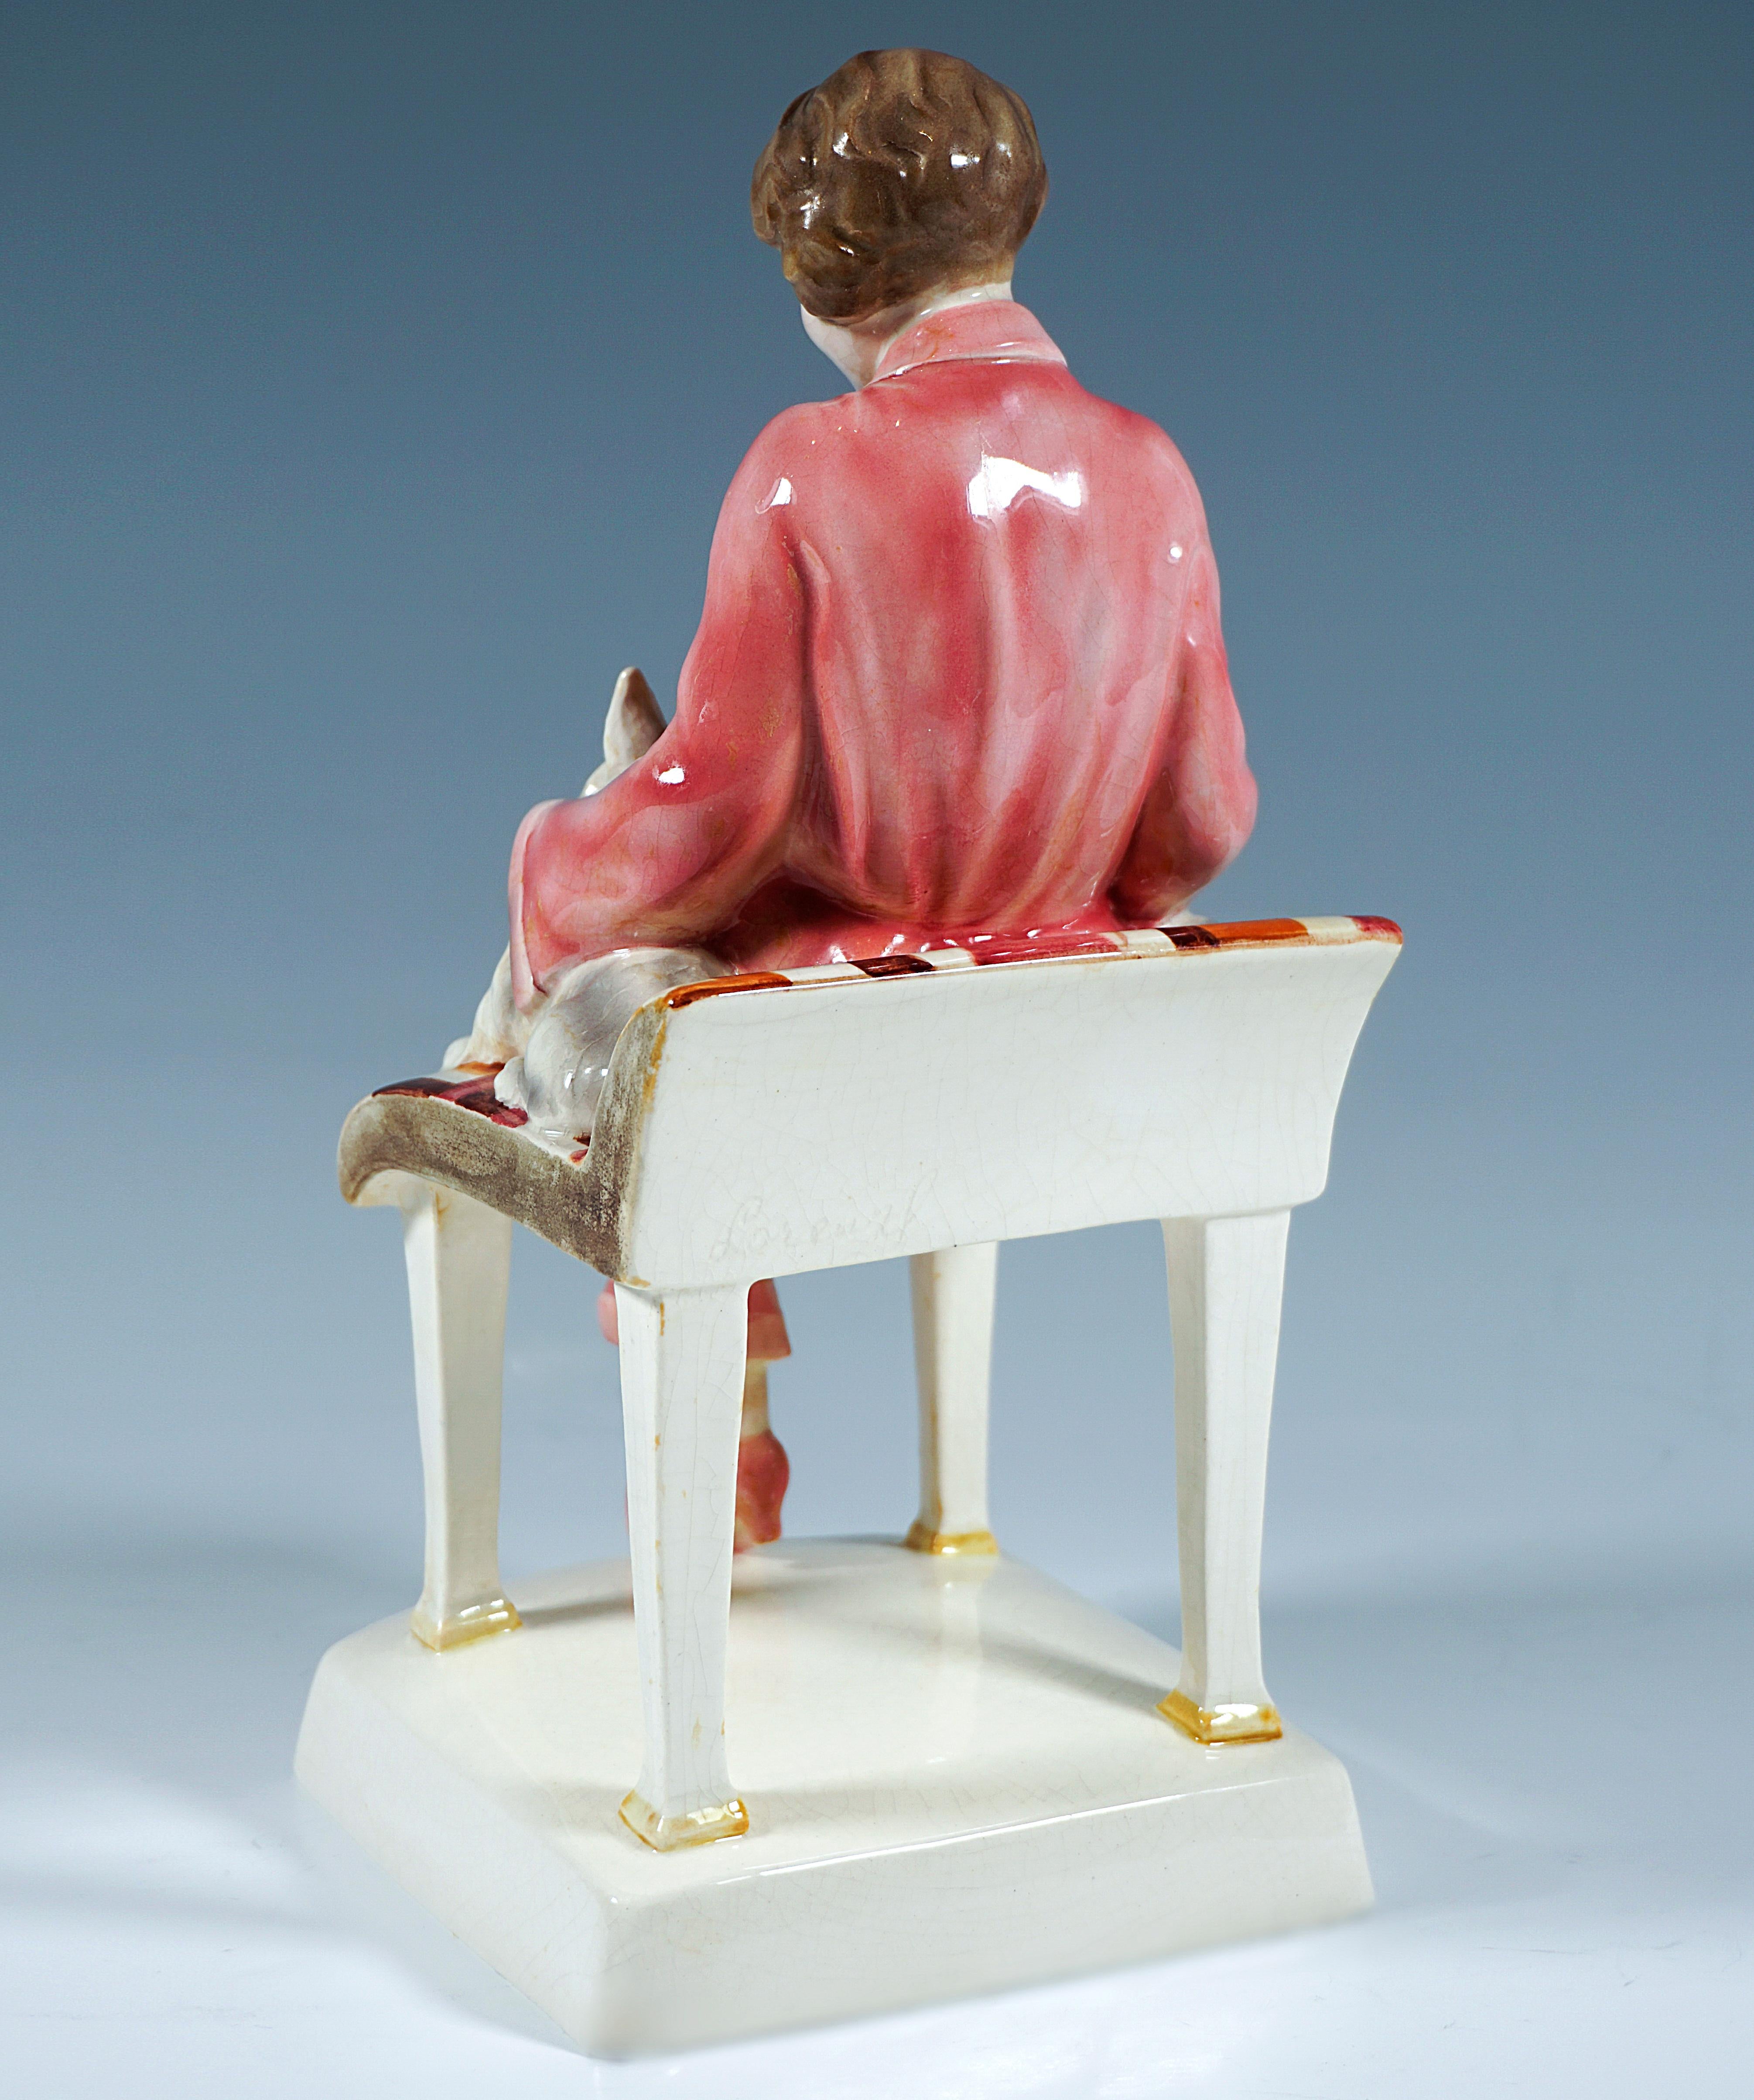 Art Deco Goldscheider Vienna Ceramic Sitting Lady With Two Terriers by Josef Lorenzl 1930 For Sale